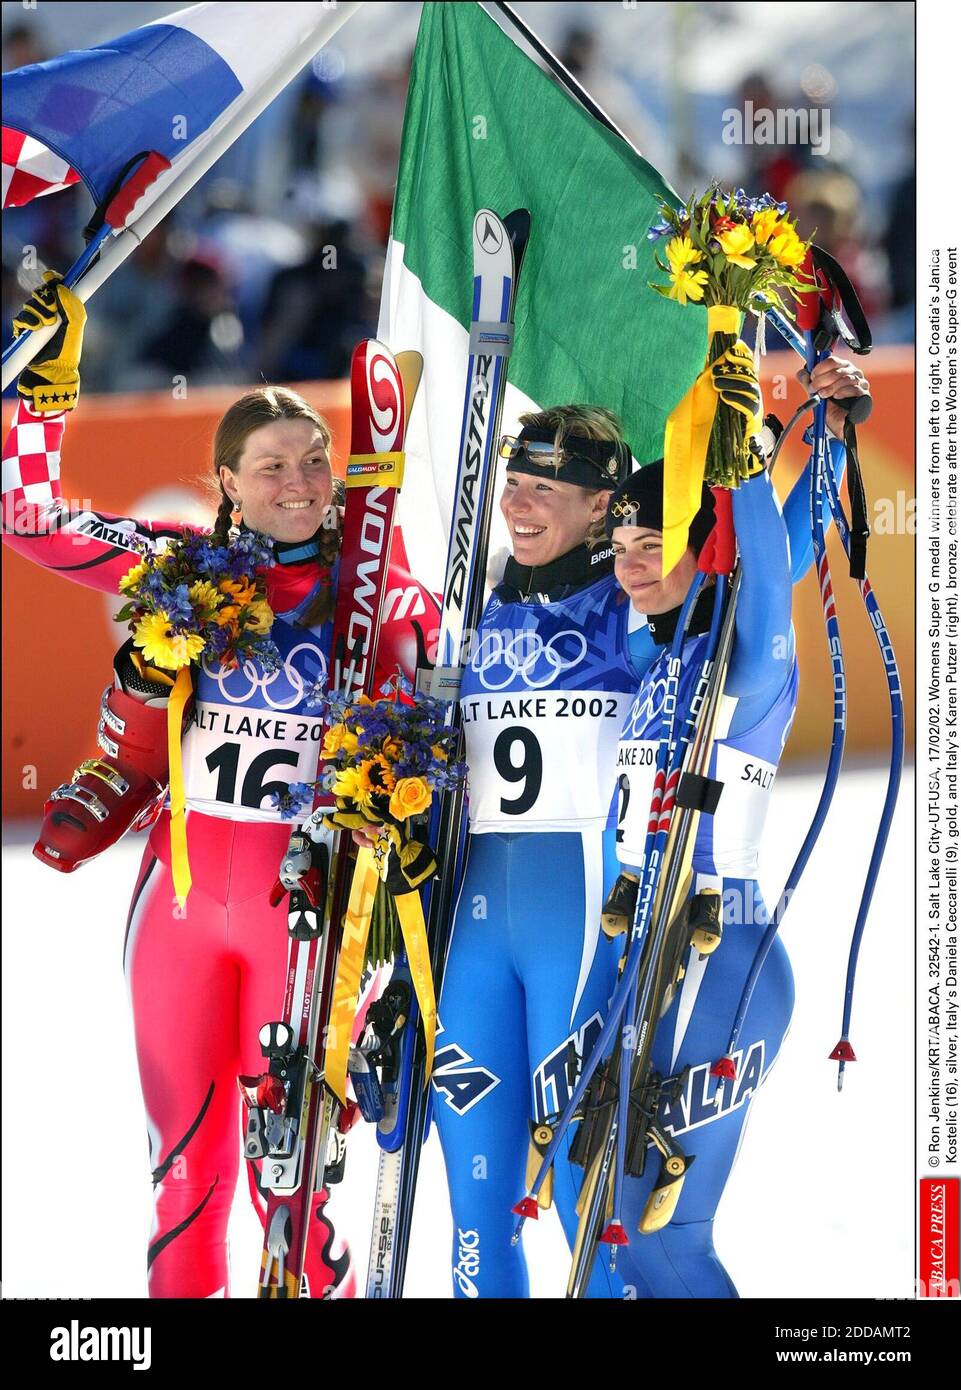 NO FILM, NO VIDEO, NO TV, NO DOCUMENTARY - © Ron Jenkins/KRT/ABACA. 32542-1. Salt Lake City-UT-USA, 17/02/02. Womens Super G medal winners from left to right, Croatia's Janica Kostelic (16), silver, Italy's Daniela Ceccarelli (9), gold, and Italy's Karen Putzer (right), bronze, celebrate after the Stock Photo